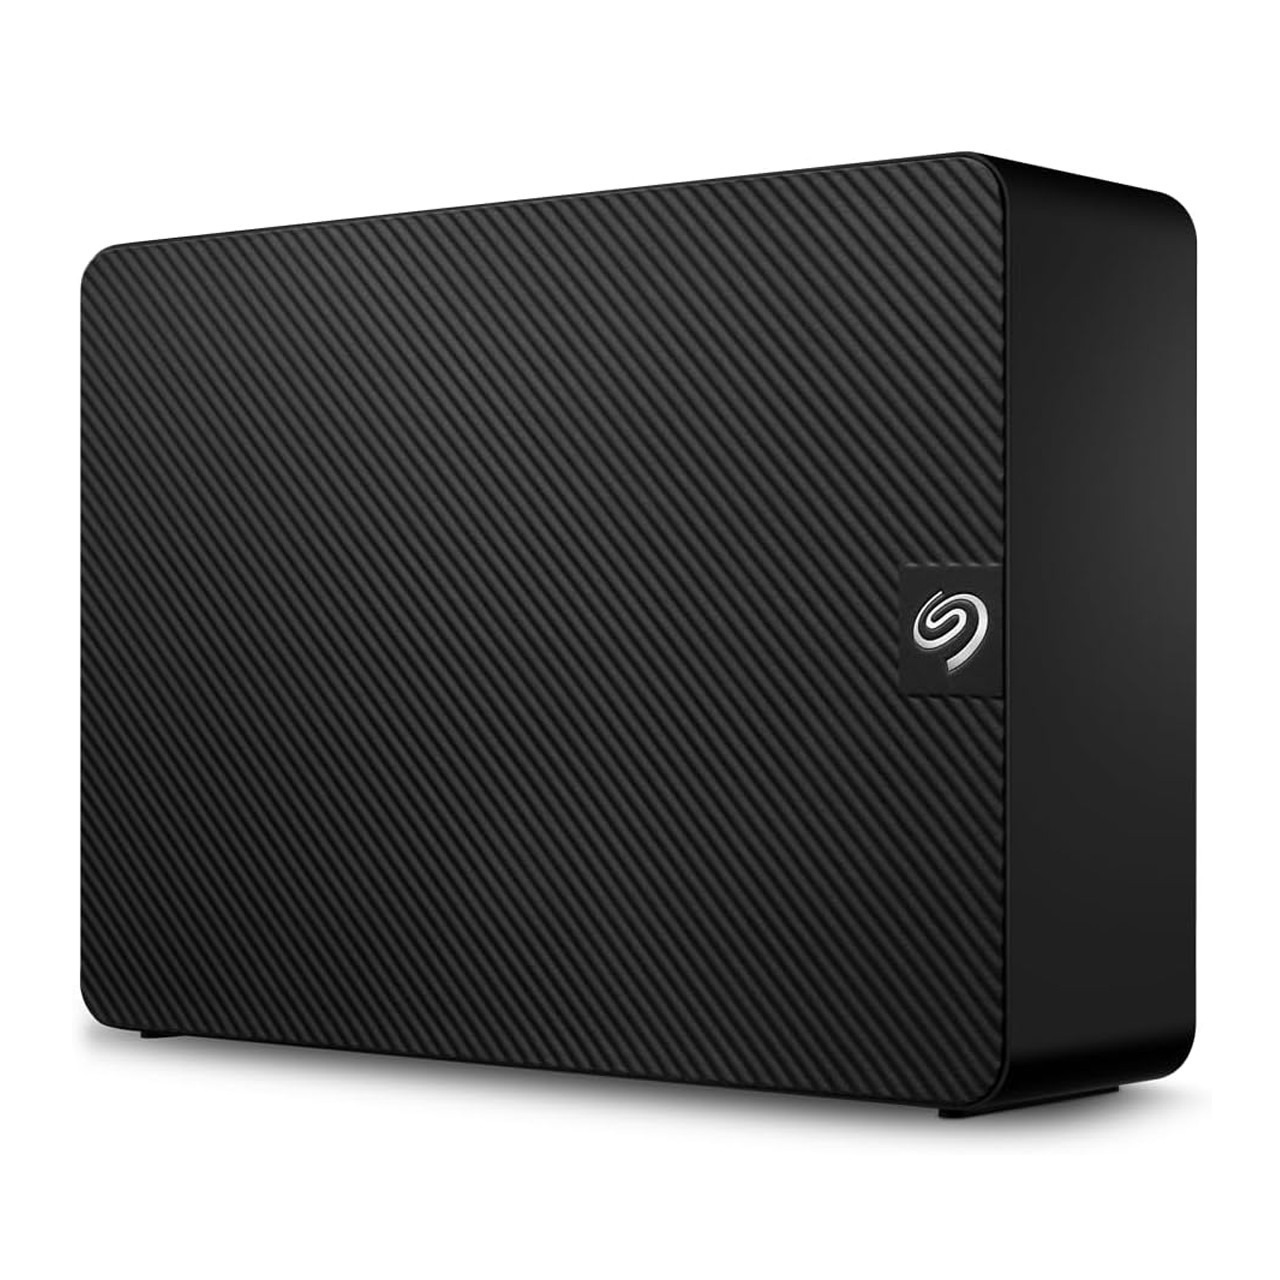 14TB Seagate Expansion 3.5" External Hard Drive USB 3.0 w/ Rescue Data Recovery Services $160 + Free Shipping